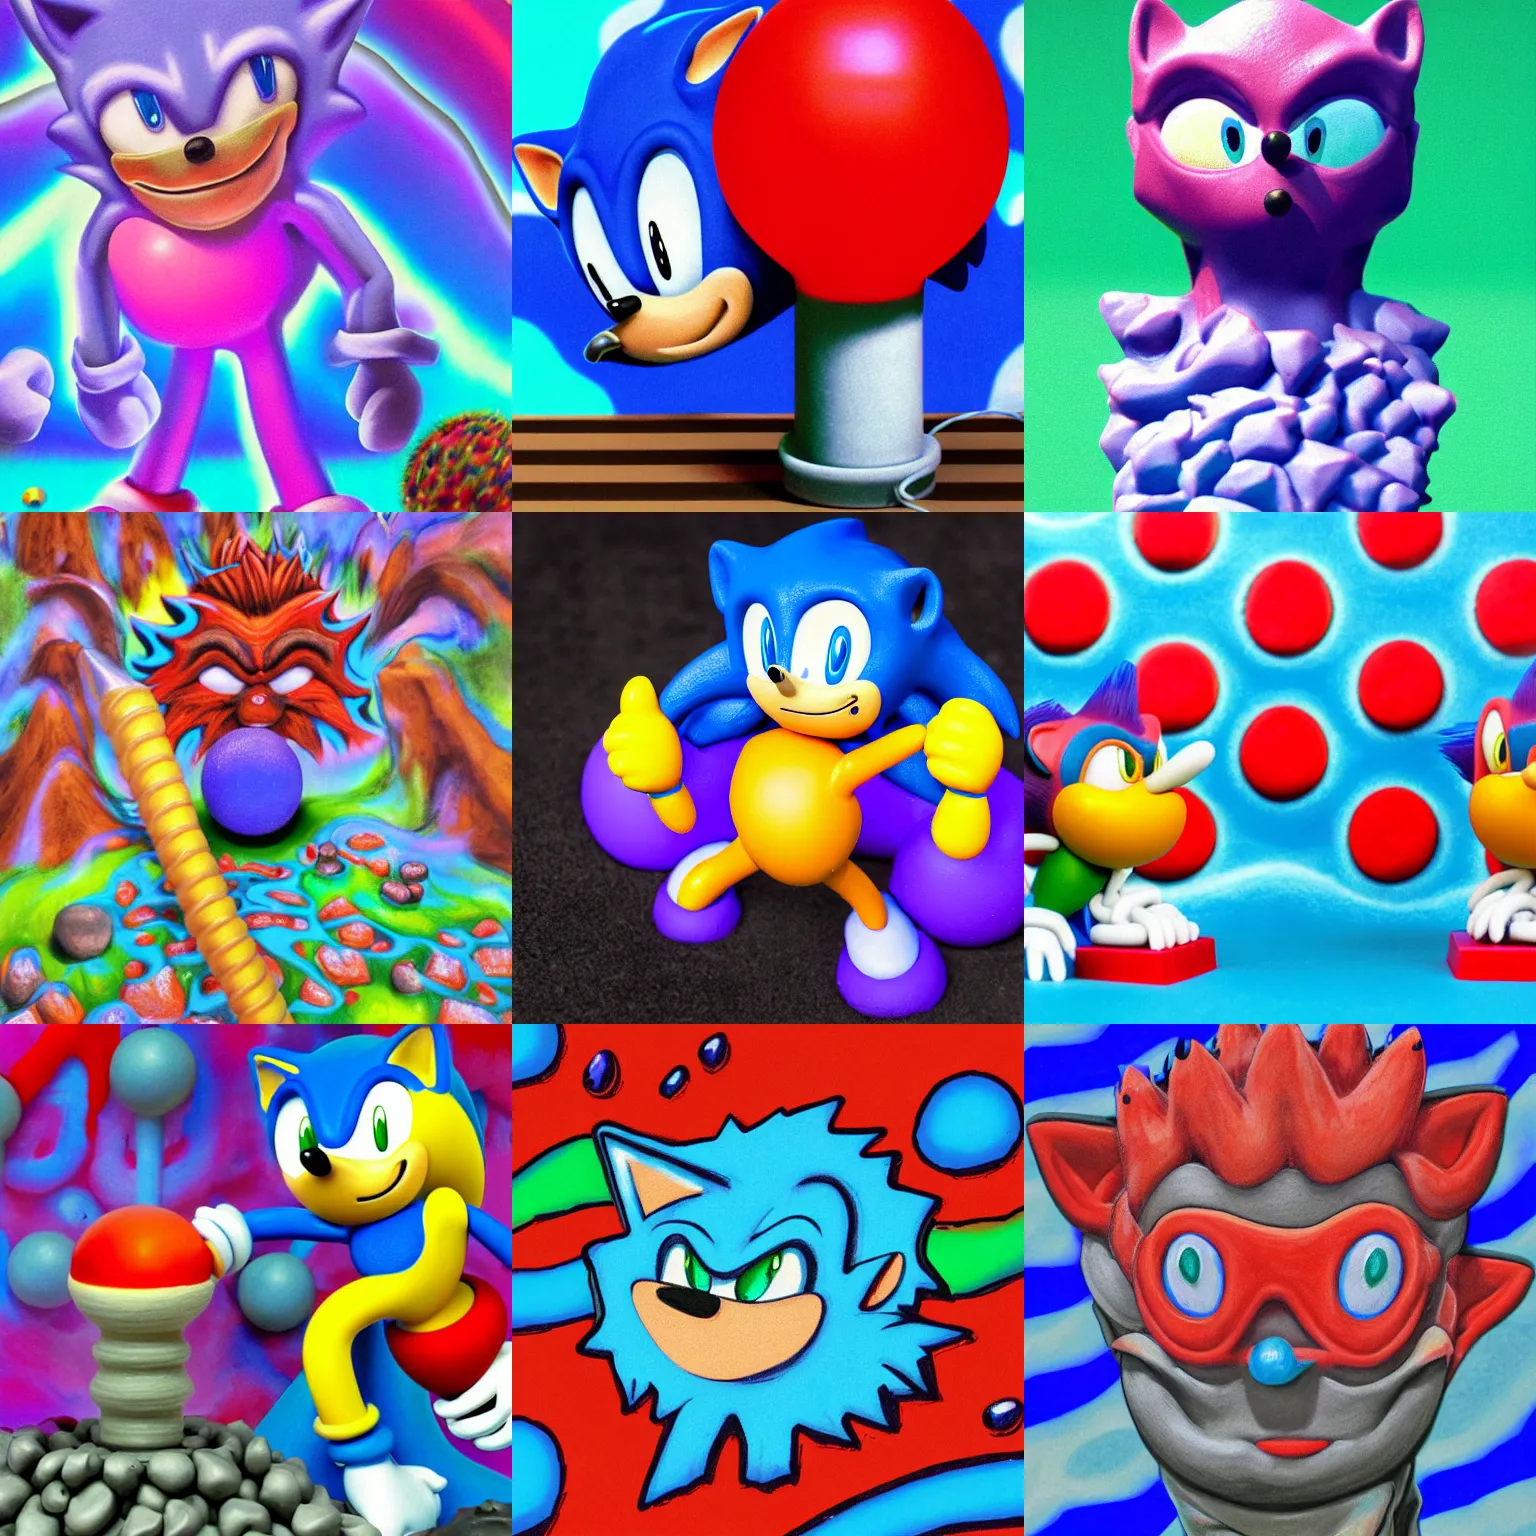 Prompt: clay stop motion claymation portrait of sonic hedgehog and surreal sharp, detailed professional soft pastels high quality airbrush art lava lamp album cover liquid dissolving airbrush art lsd dmt sonic the hedgehog swimming through cyberspace lava lamp checkerboard background 1 9 9 0 s 1 9 9 2 sega genesis rareware video game album cover